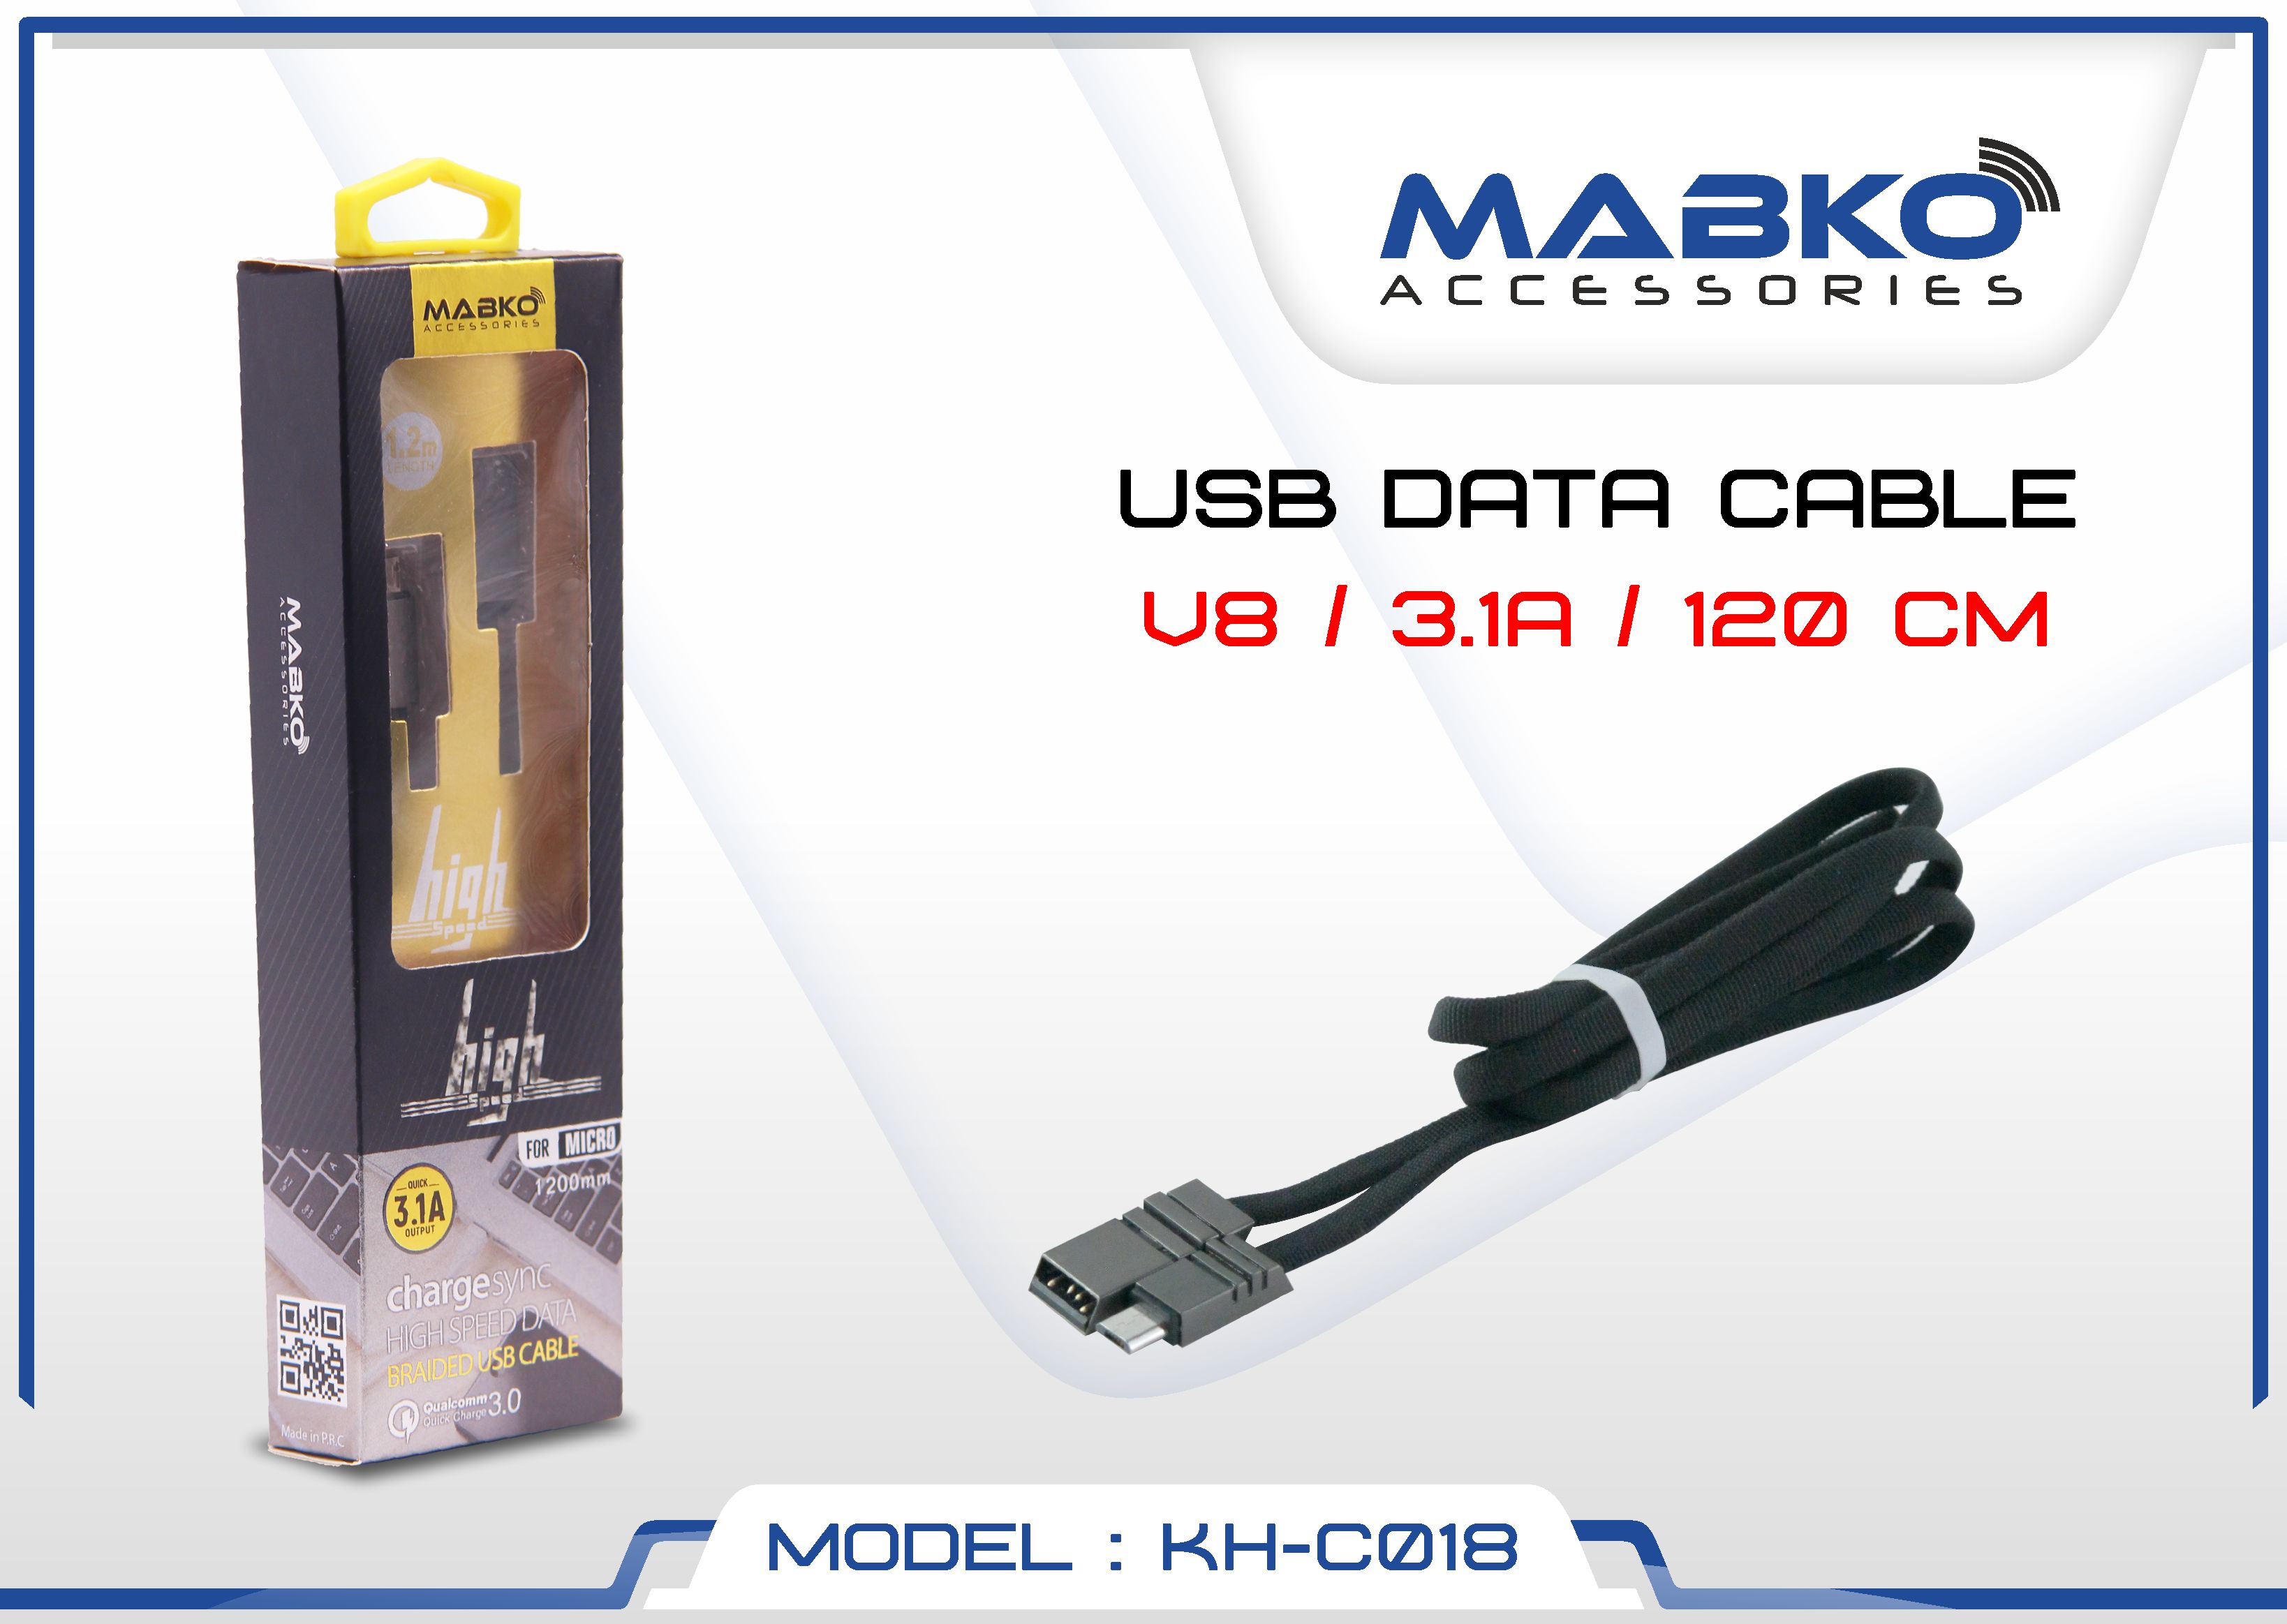 CHARGER 2,1A KH-J003